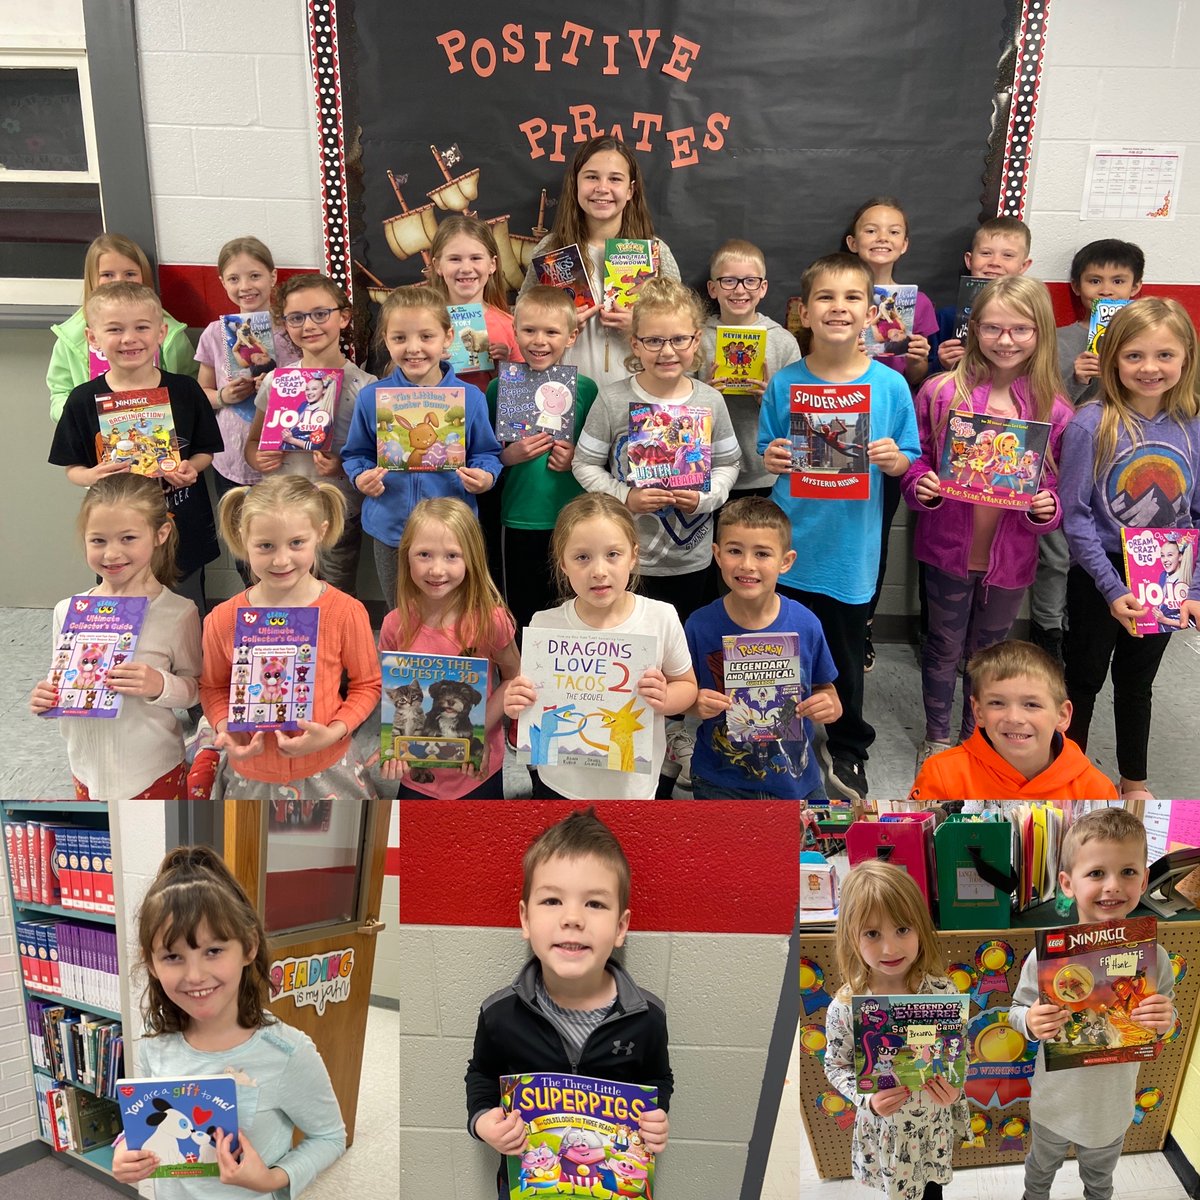 Congrats to all these kiddos for completing their Bookopoly!! I hope you all enjoy the books and keep reading! Not pictured, Marvin Richter, Quinn Jacot, and Kirbee Doerr #readersgonnaread #newbookstoread